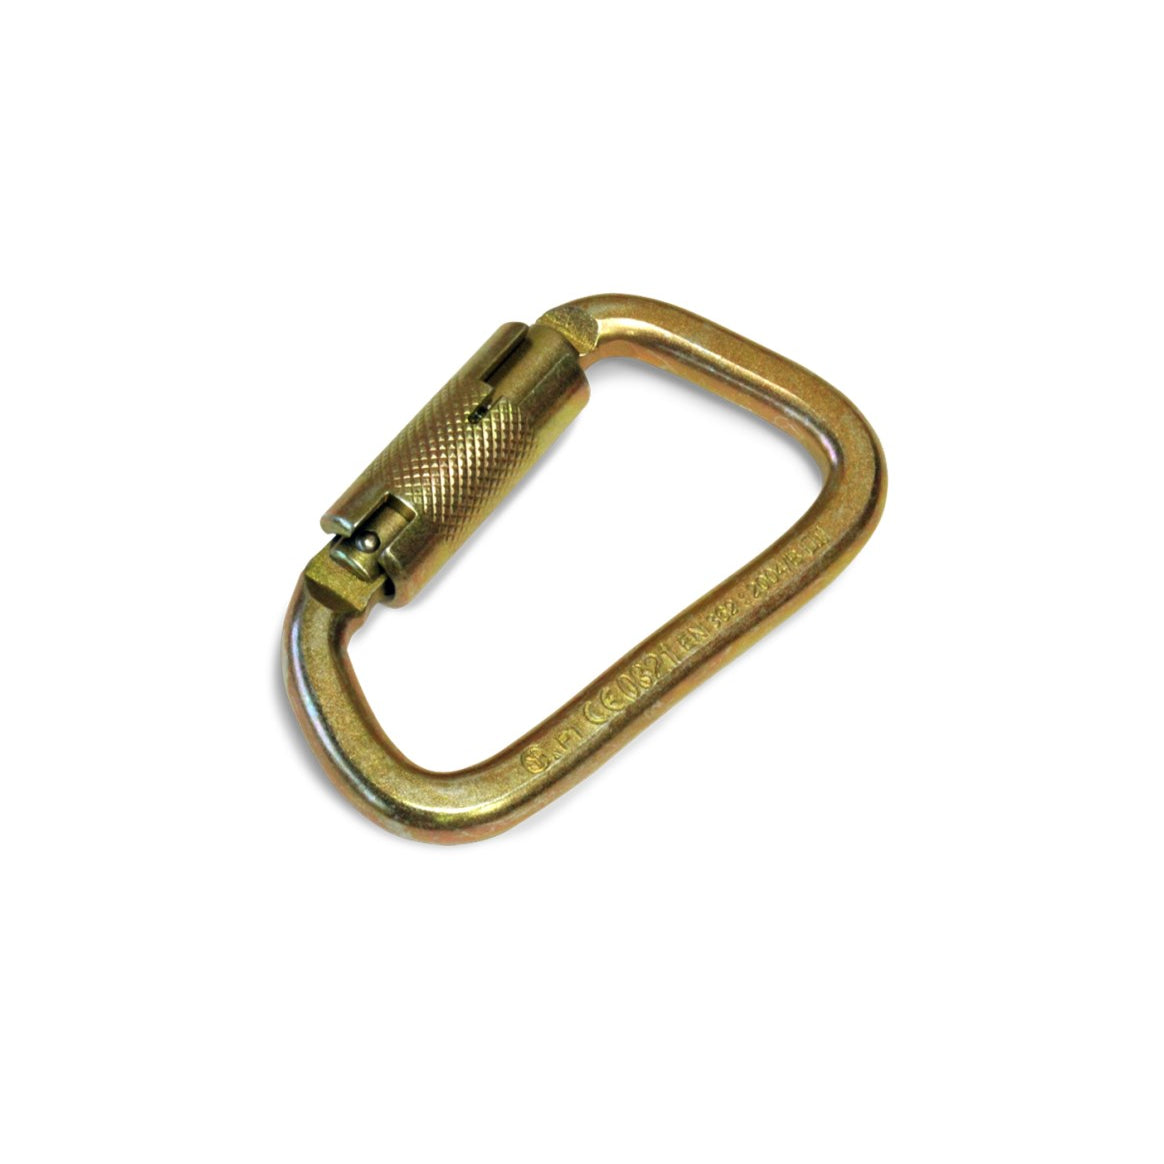 WORKHORSE® 0.75" Carabiner, 5000lb Rated Heat Treated Alloy Steel